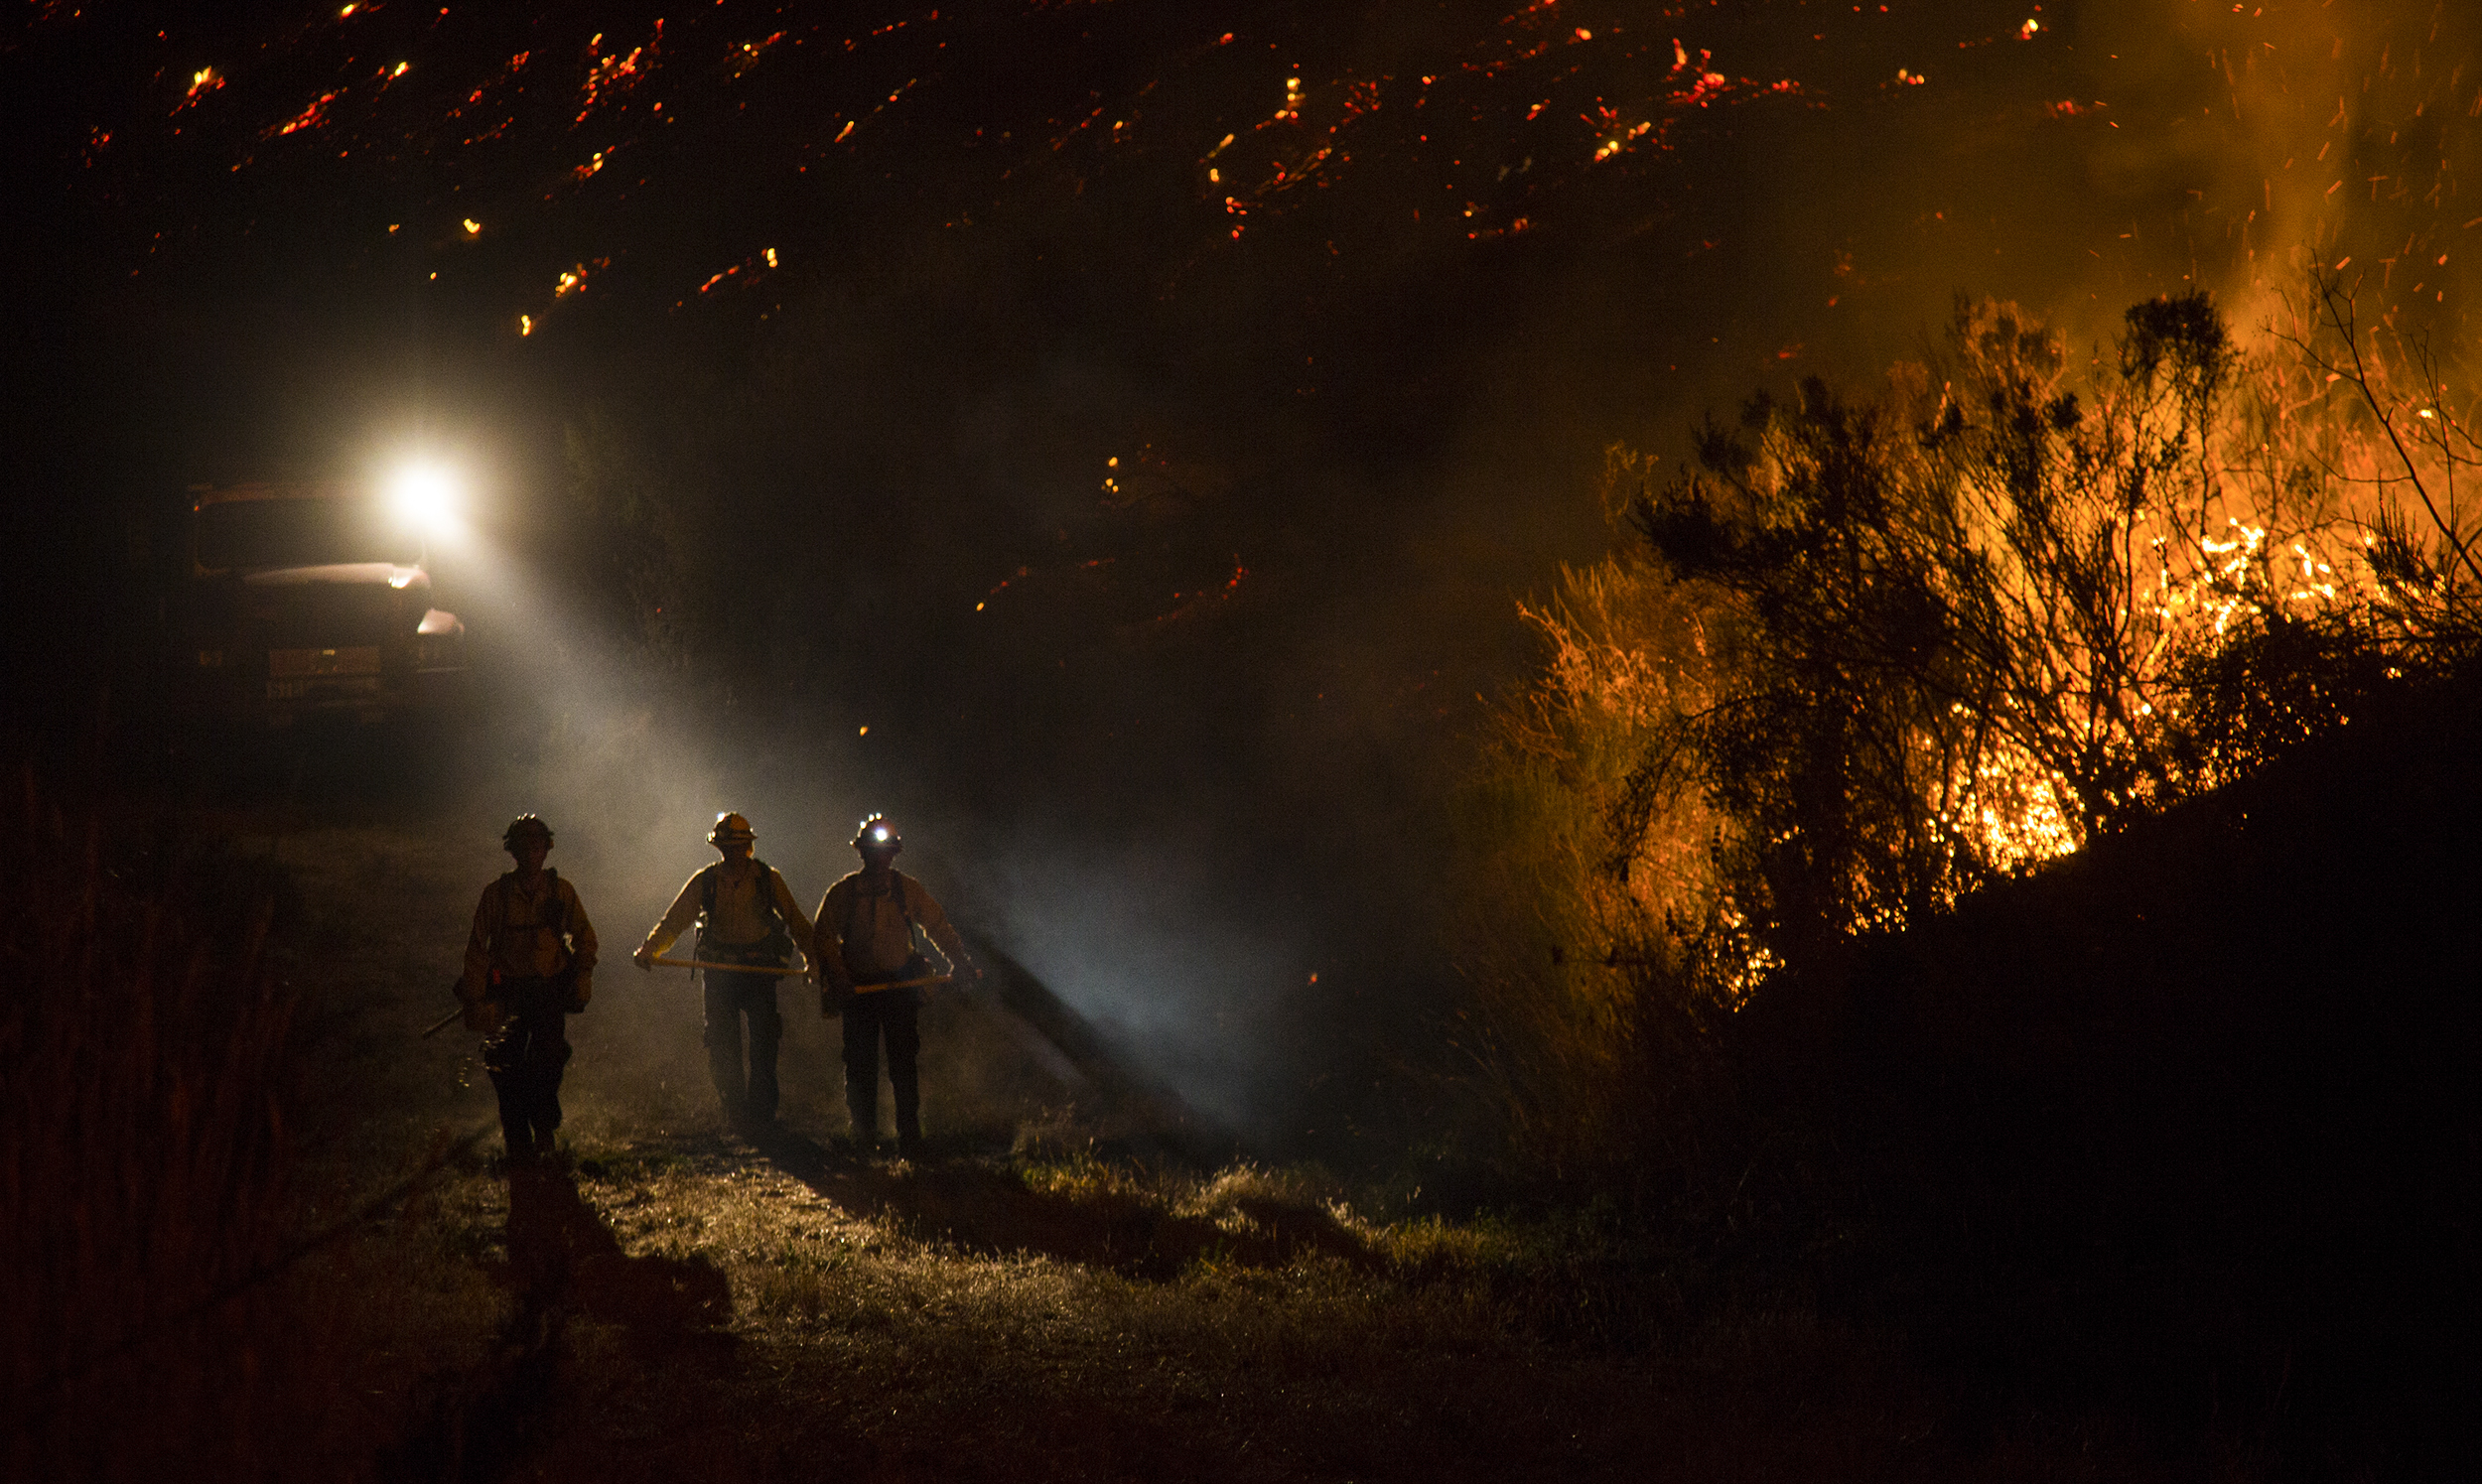  Firefighters fight the Refugio Fire along a trail behind the El Capitan Canyon camp in Santa Barbara, CA. Firefighters continue to fight more aggressive wildfires as the drought continues in California for its fifth year.&nbsp; 